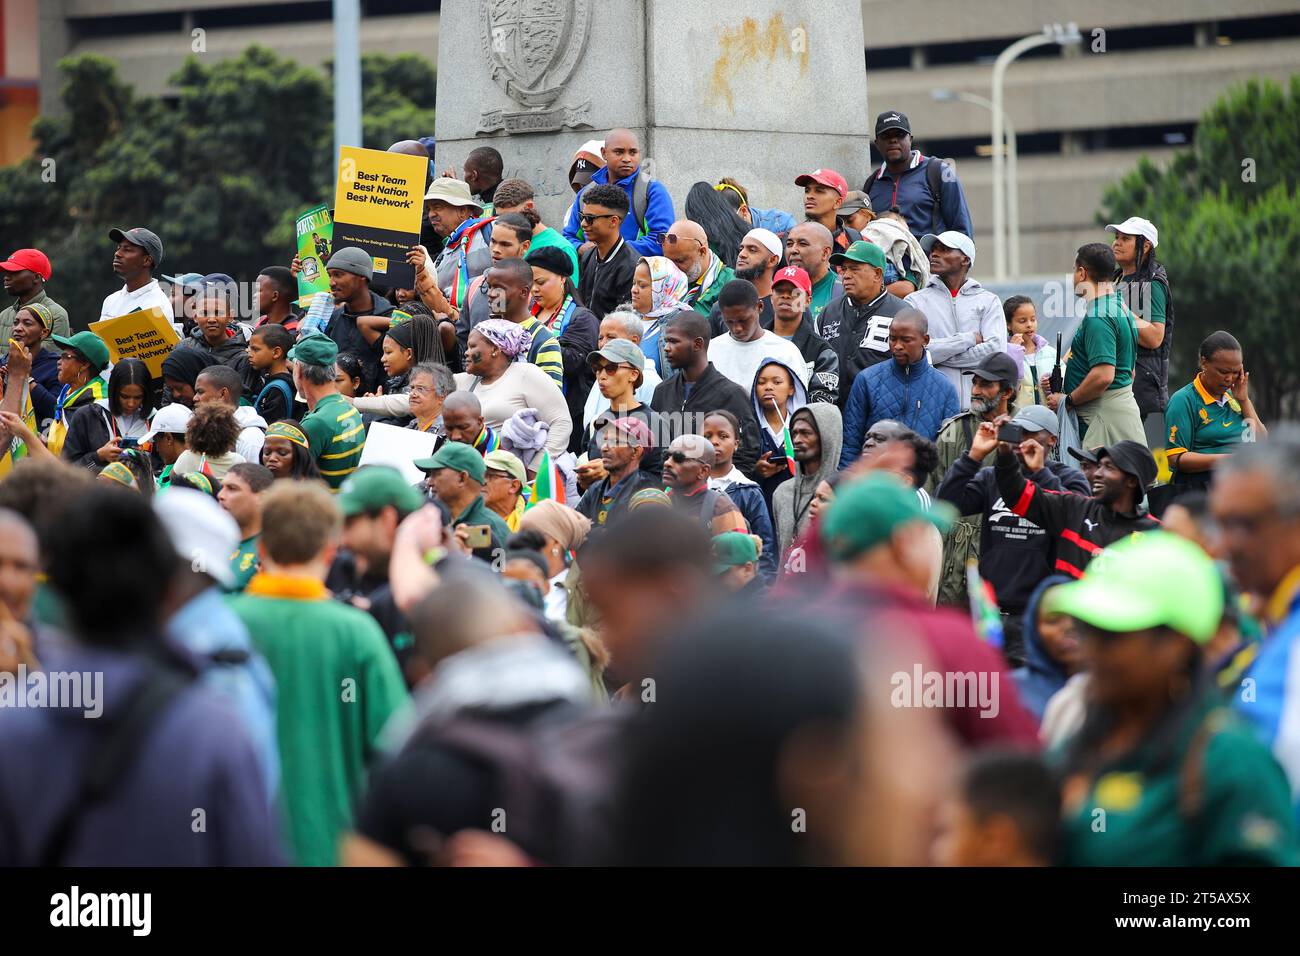 CAPE TOWN, SOUTH AFRICA - NOVEMBER 03: fans on the steps at the Grand Parade during the Springbok Trophy tour in Cape Town on November 03, 2023 in Cape Town, South Africa. The Springboks beat the New Zealand All Blacks 12-11 to win the Rugby World Cup in Paris, France on Saturday 28 October 2023. (Photo by Roger Sedres) Stock Photo